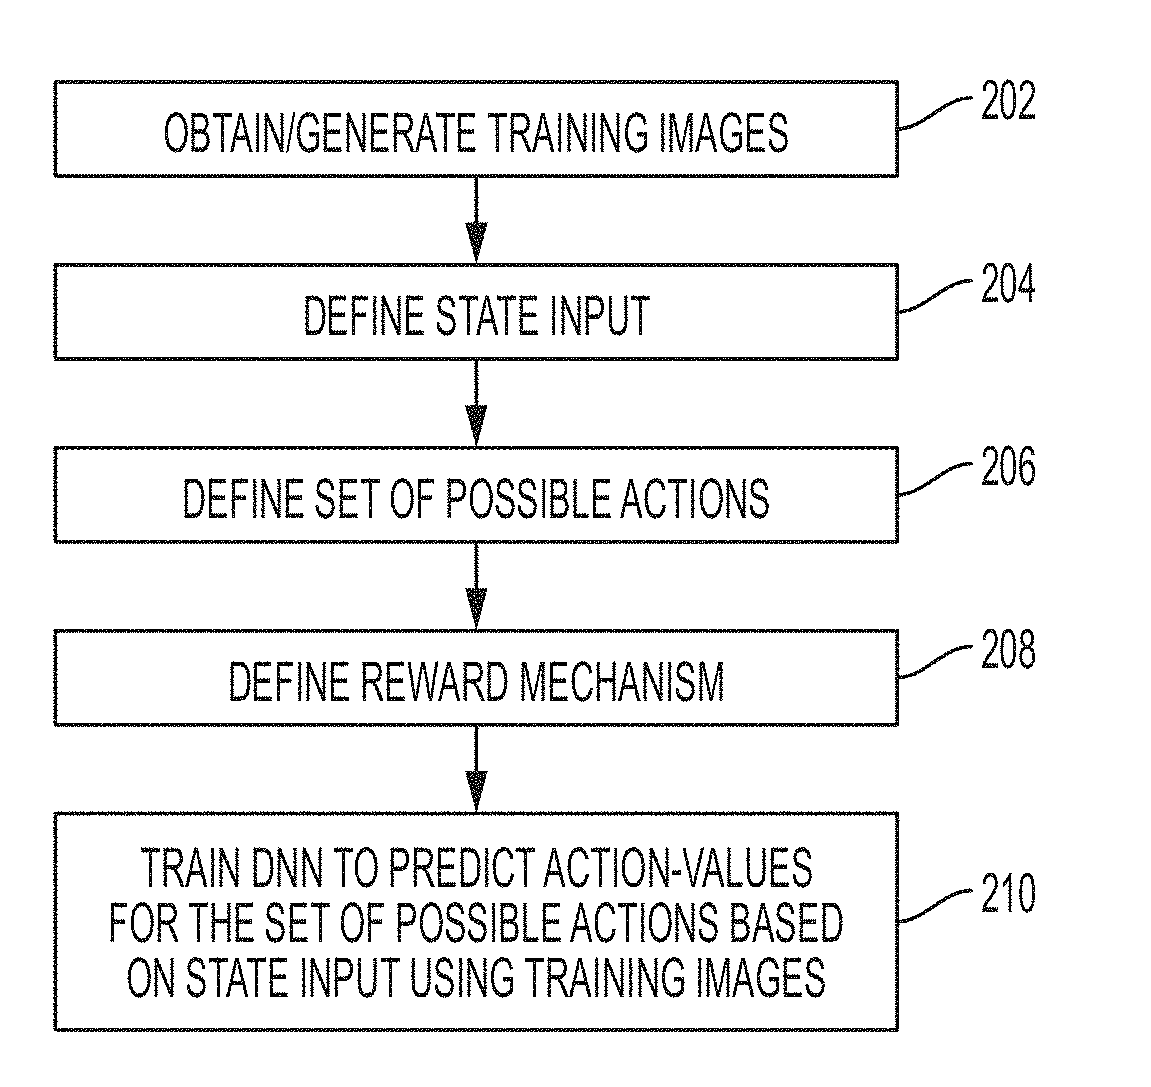 Method and System for Image Registration Using an Intelligent Artificial Agent